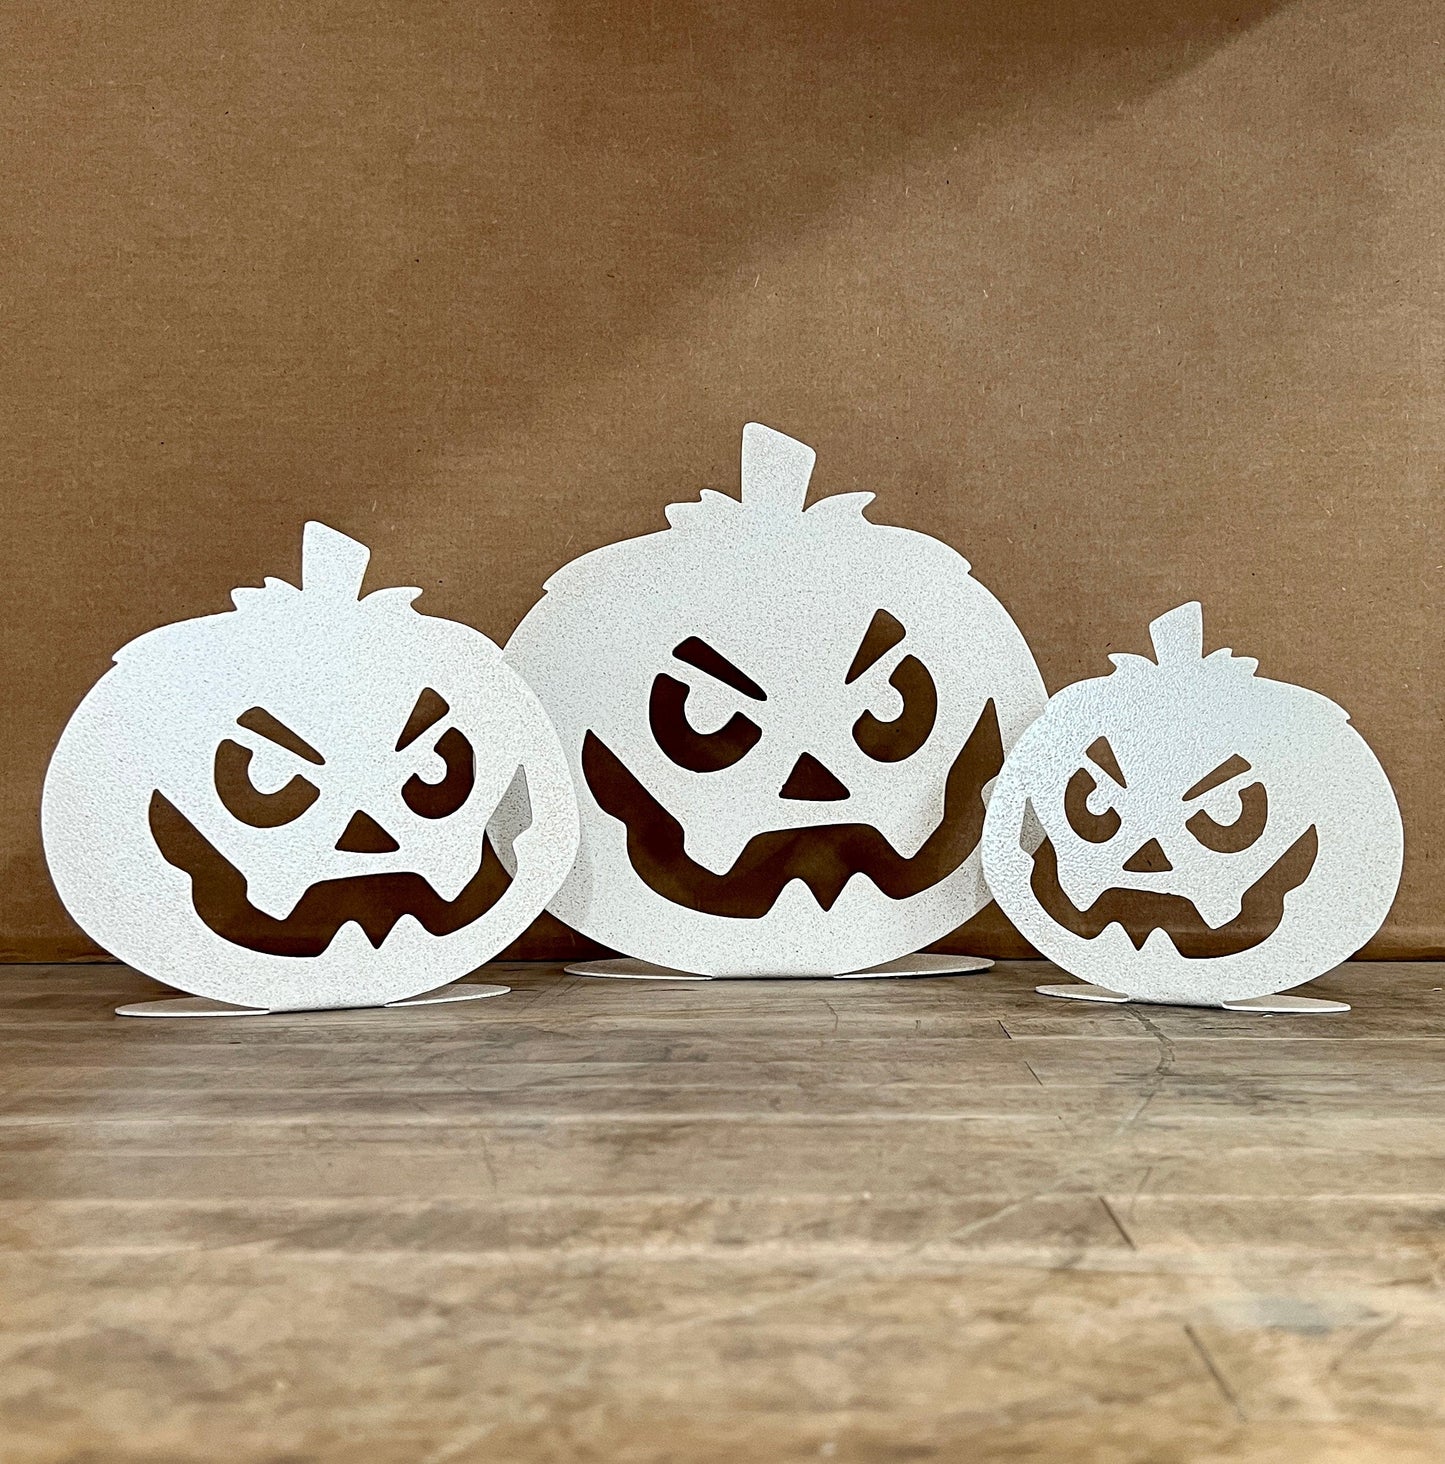 Rusty Rooster Fabrication & Design Physical product "Rustic Elegance: Set of Three Handcrafted Metal Pumpkins for Autumn Décor" (B90)